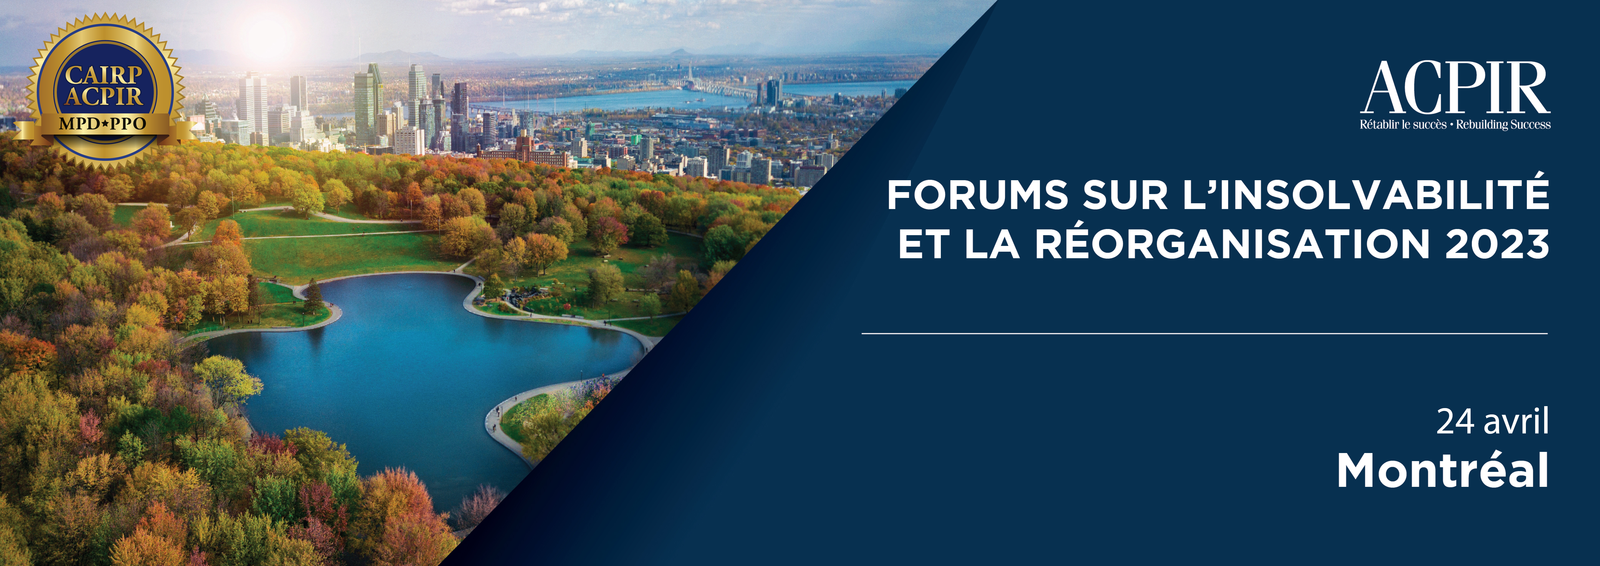 Event_Images/Forums_Masthead-FR_Montreal.png